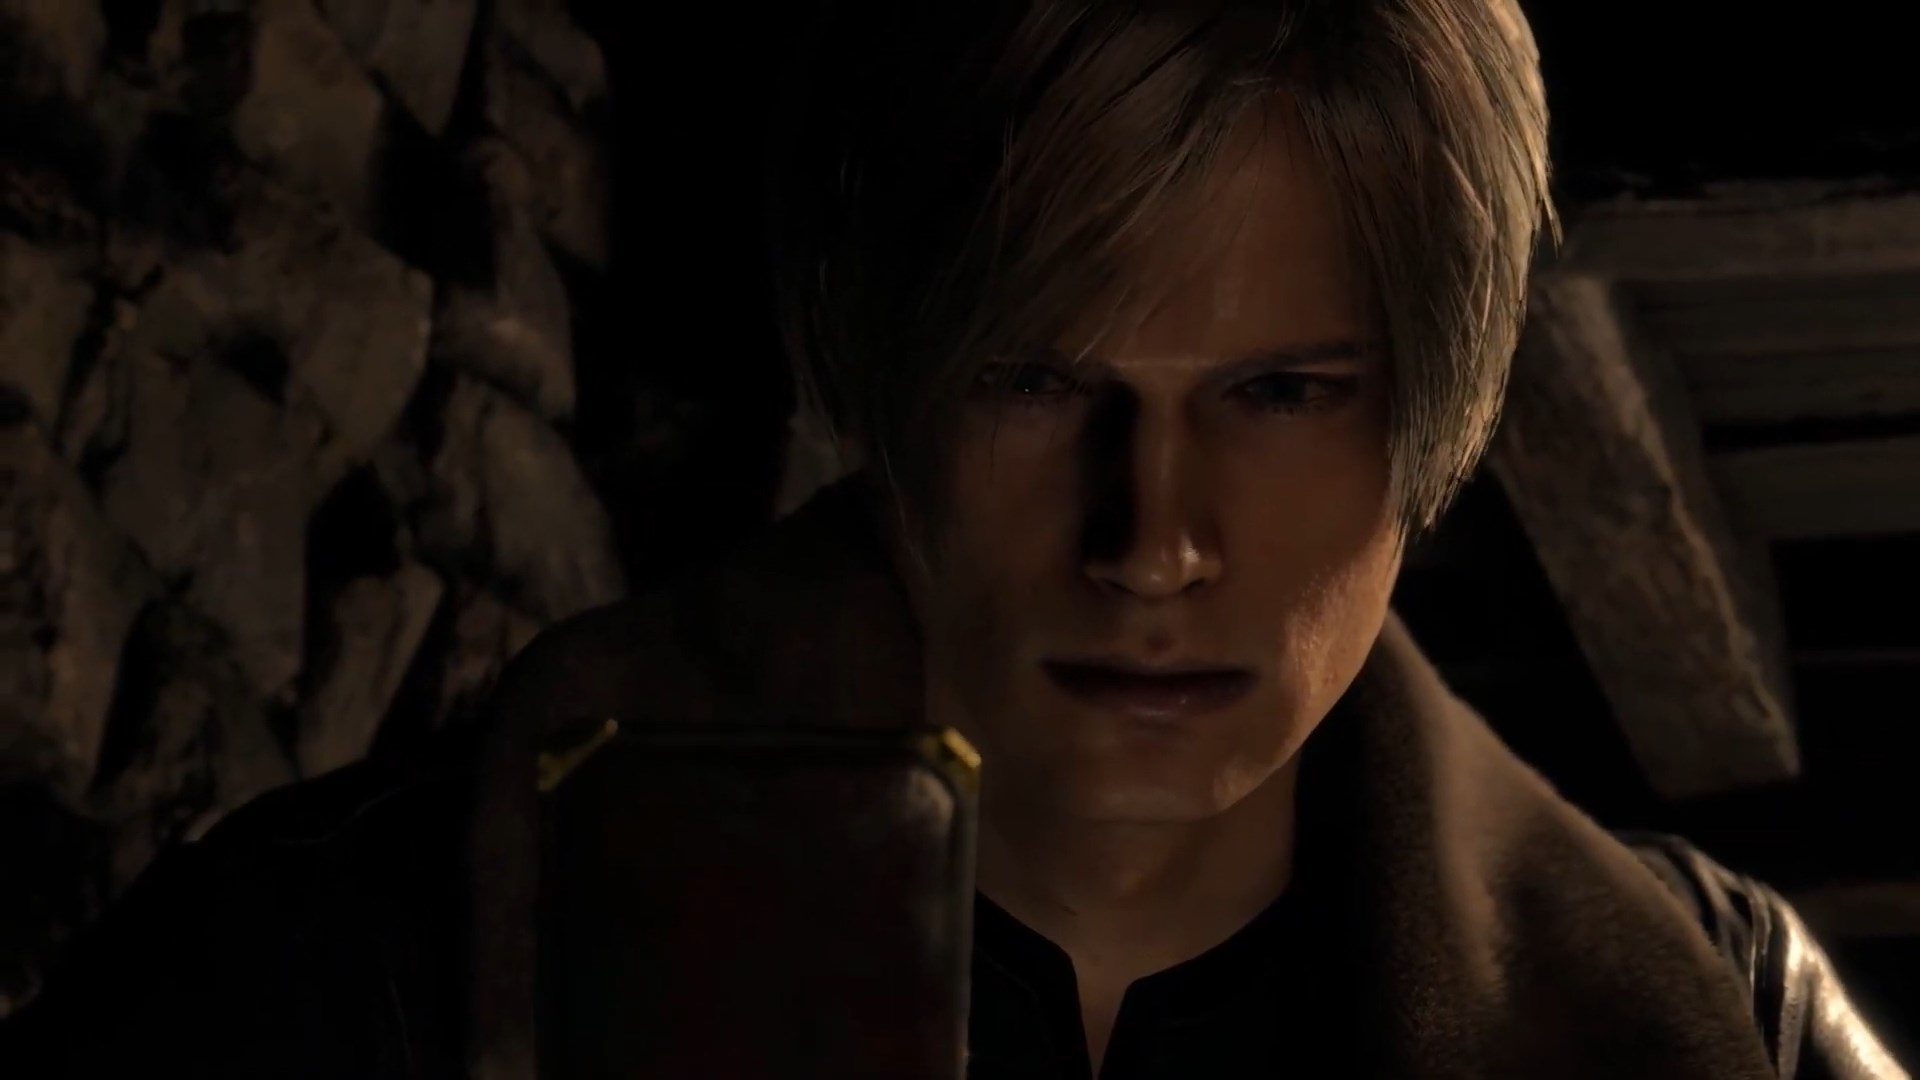 Resident Evil 4 Gets New Gameplay Footage, Releasing Demo Soon - IGN